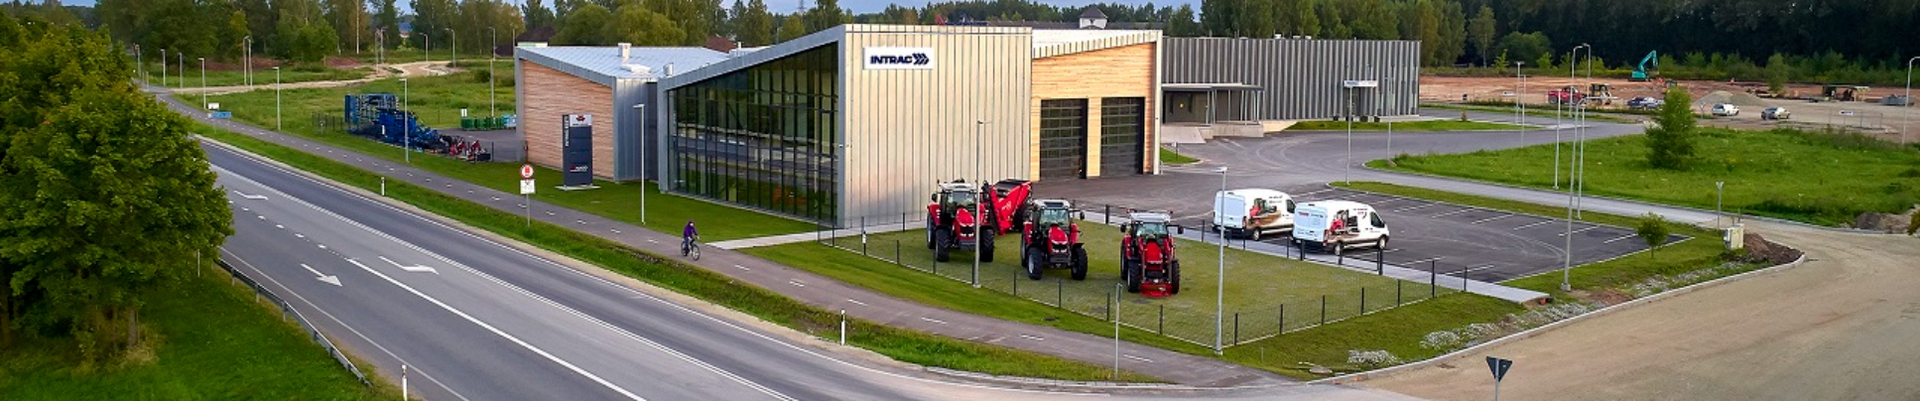 INTRAC operates mainly in the Estonian market, offering customers forestry, construction, material handling and agricultural machinery, garden and small equipment, accessories.